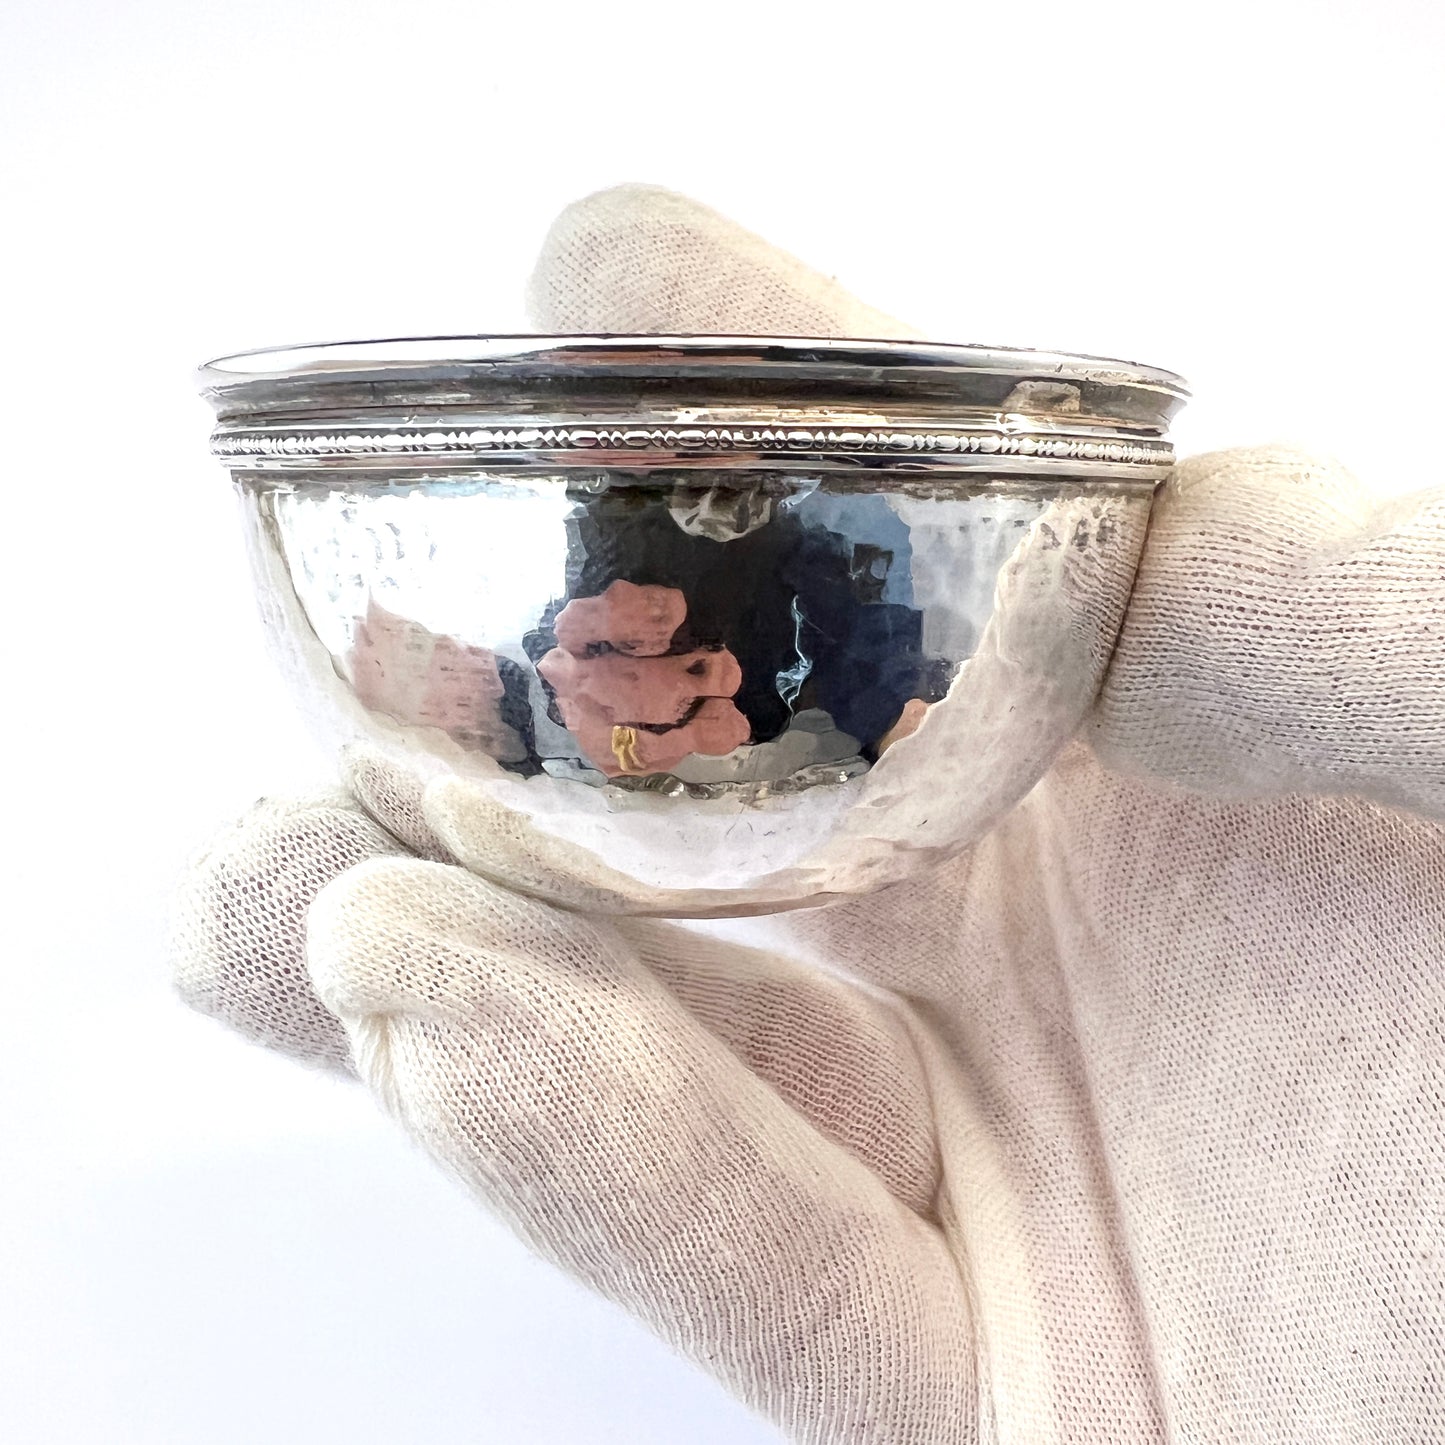 Sybil Dunlop, London 1921. Arts and Crafts Sterling Silver Tumbler Cup